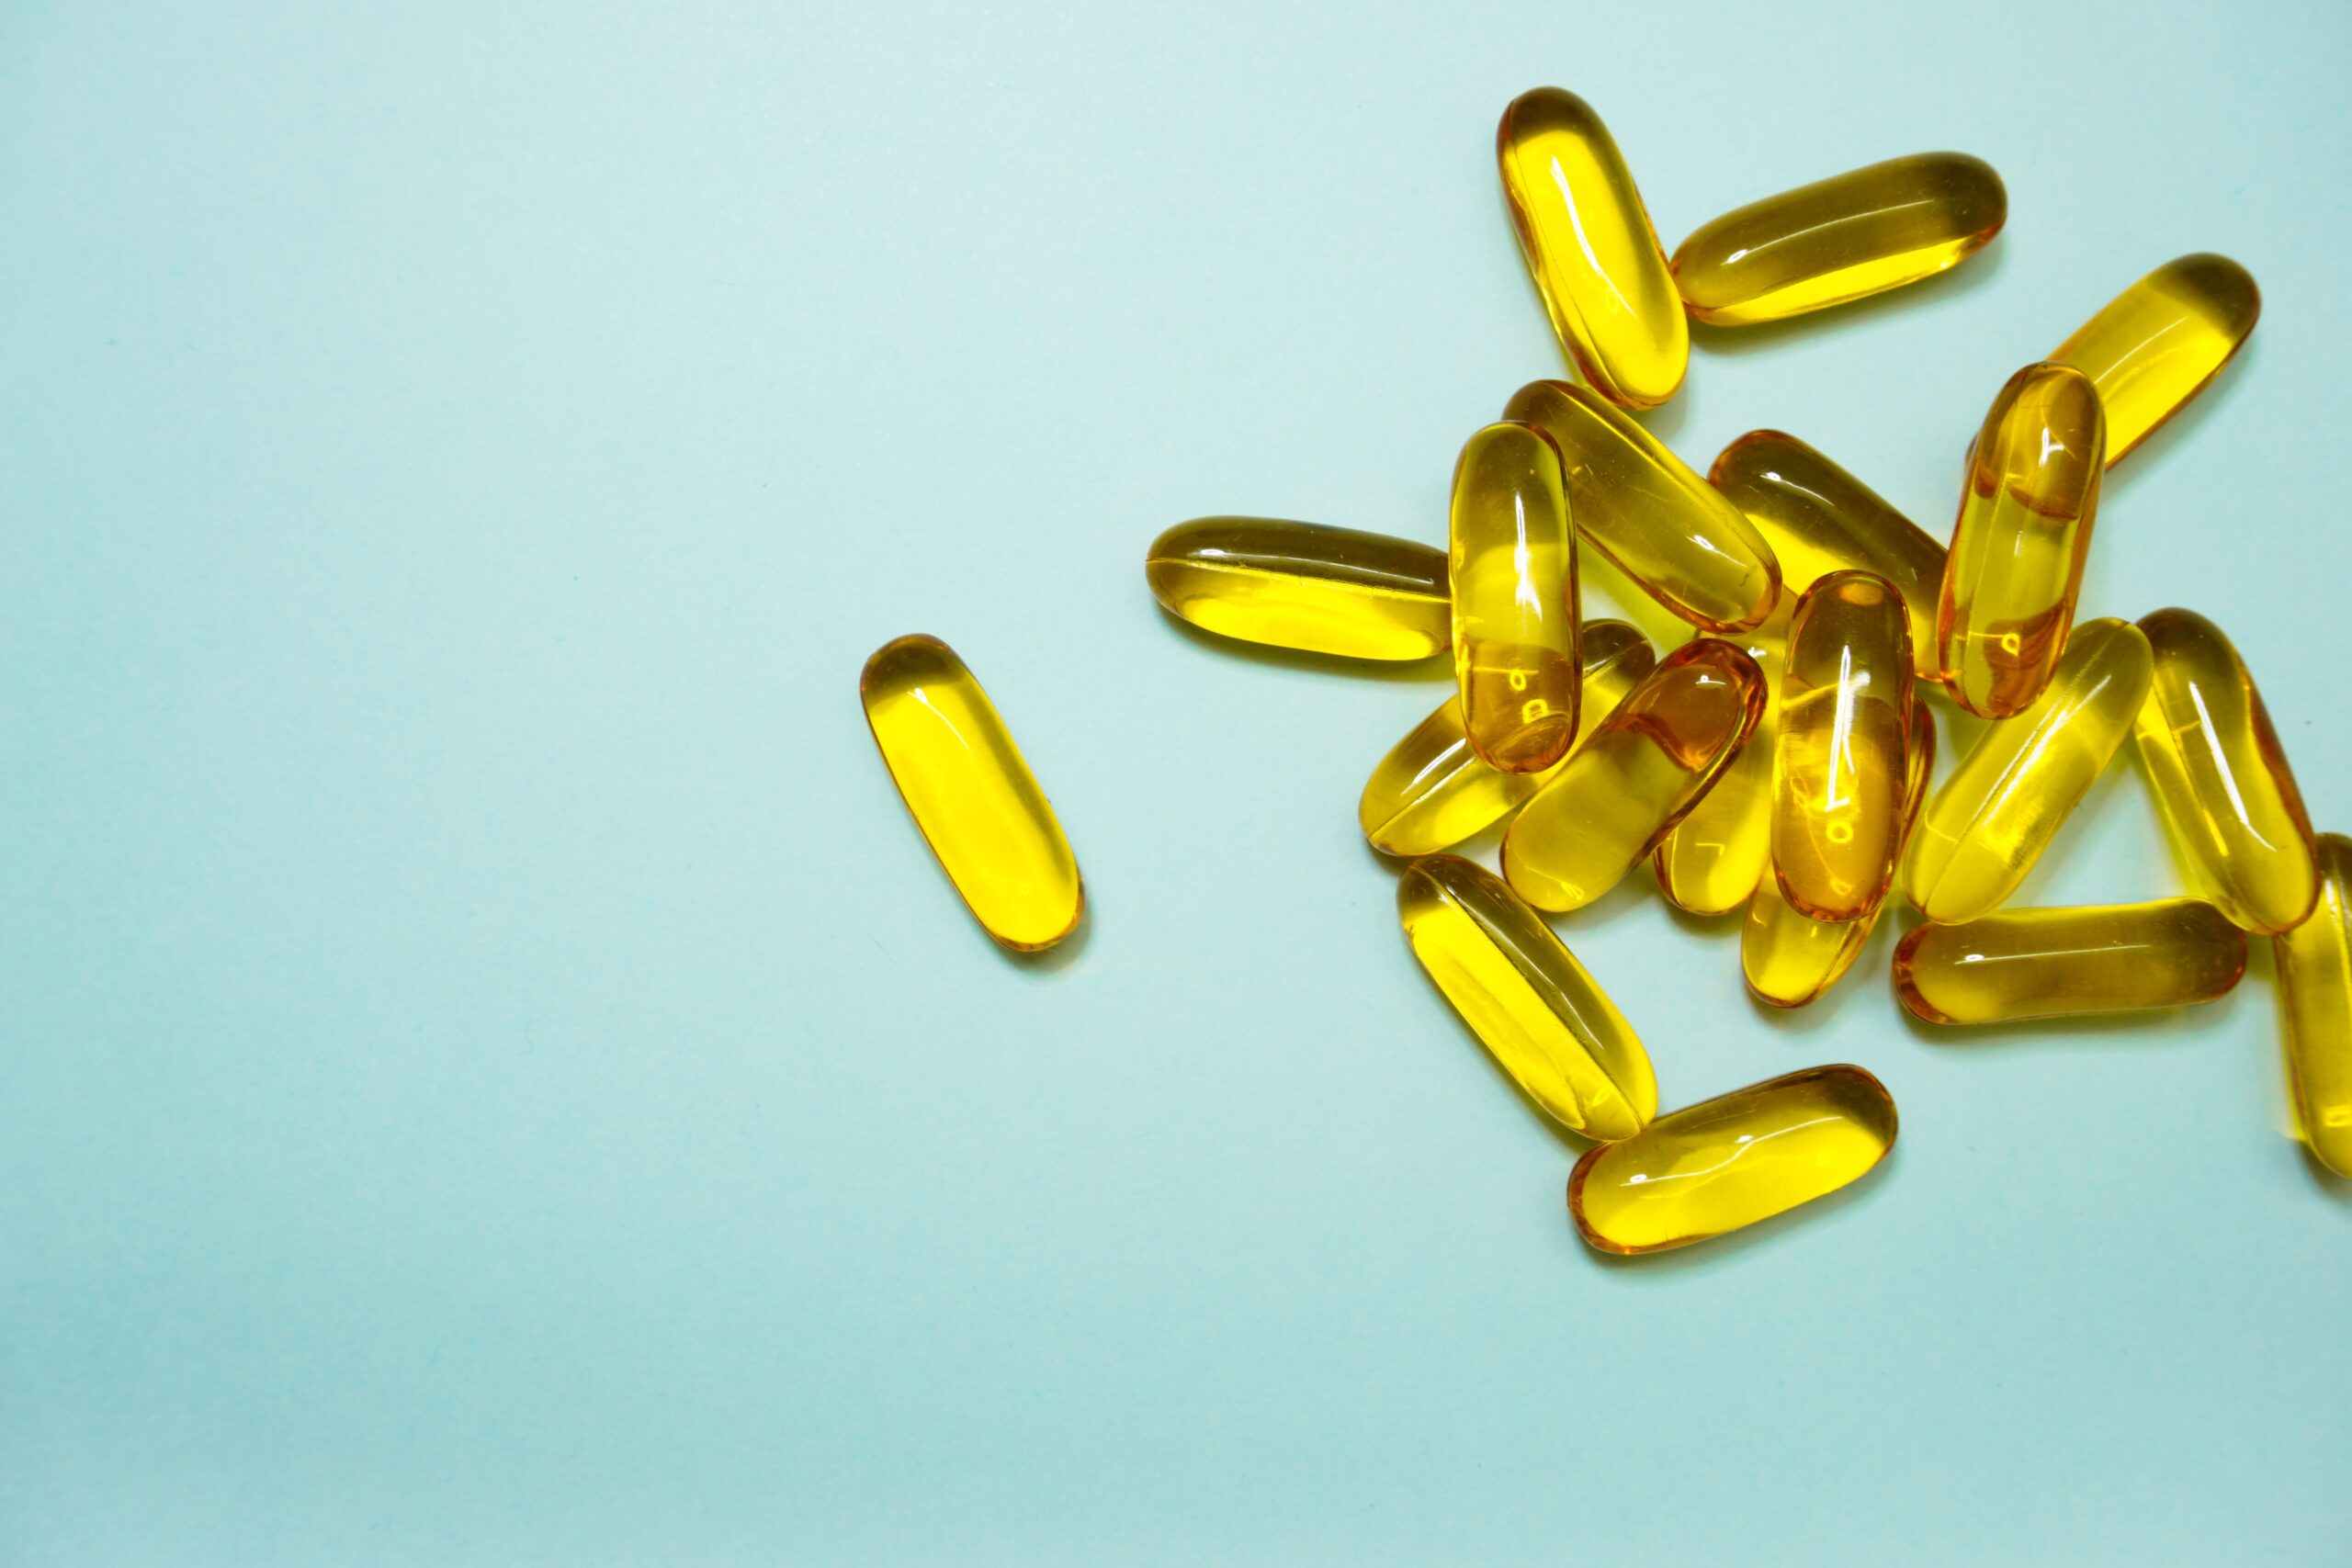 Yellow fertility supplement capsules on a pale teal background